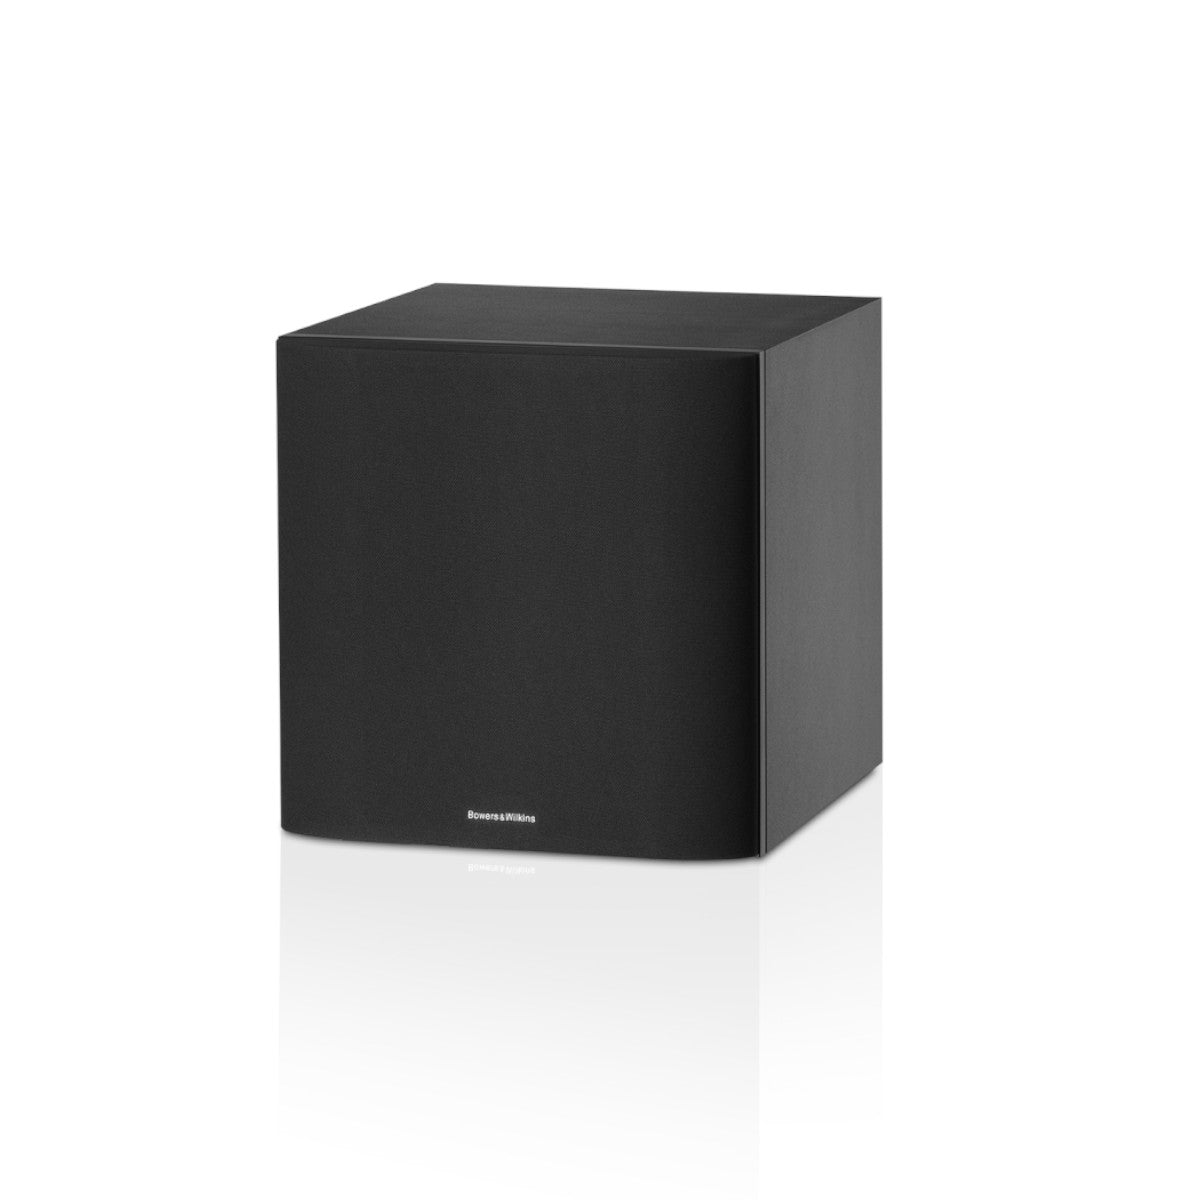 Bowers & Wilkins ASW610XP 500 Watts Subwoofer